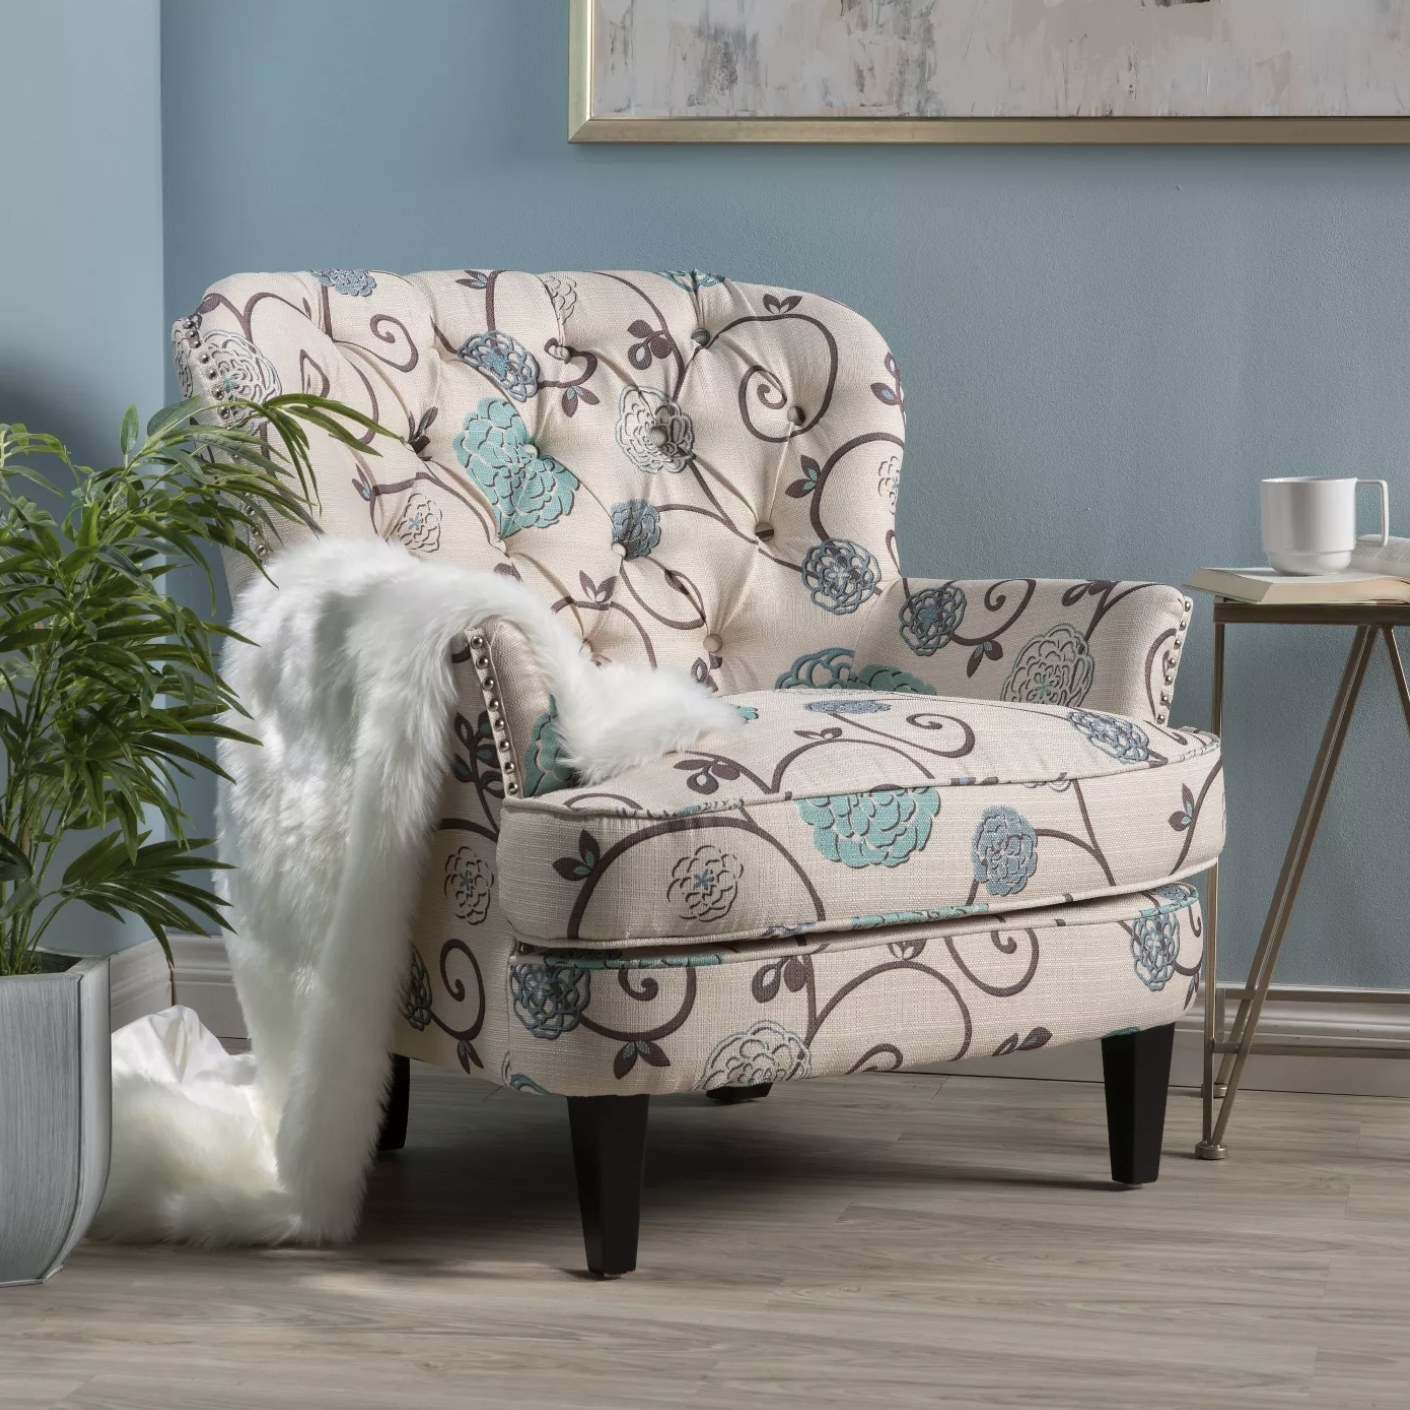 The beige accent chair with a blue floral design